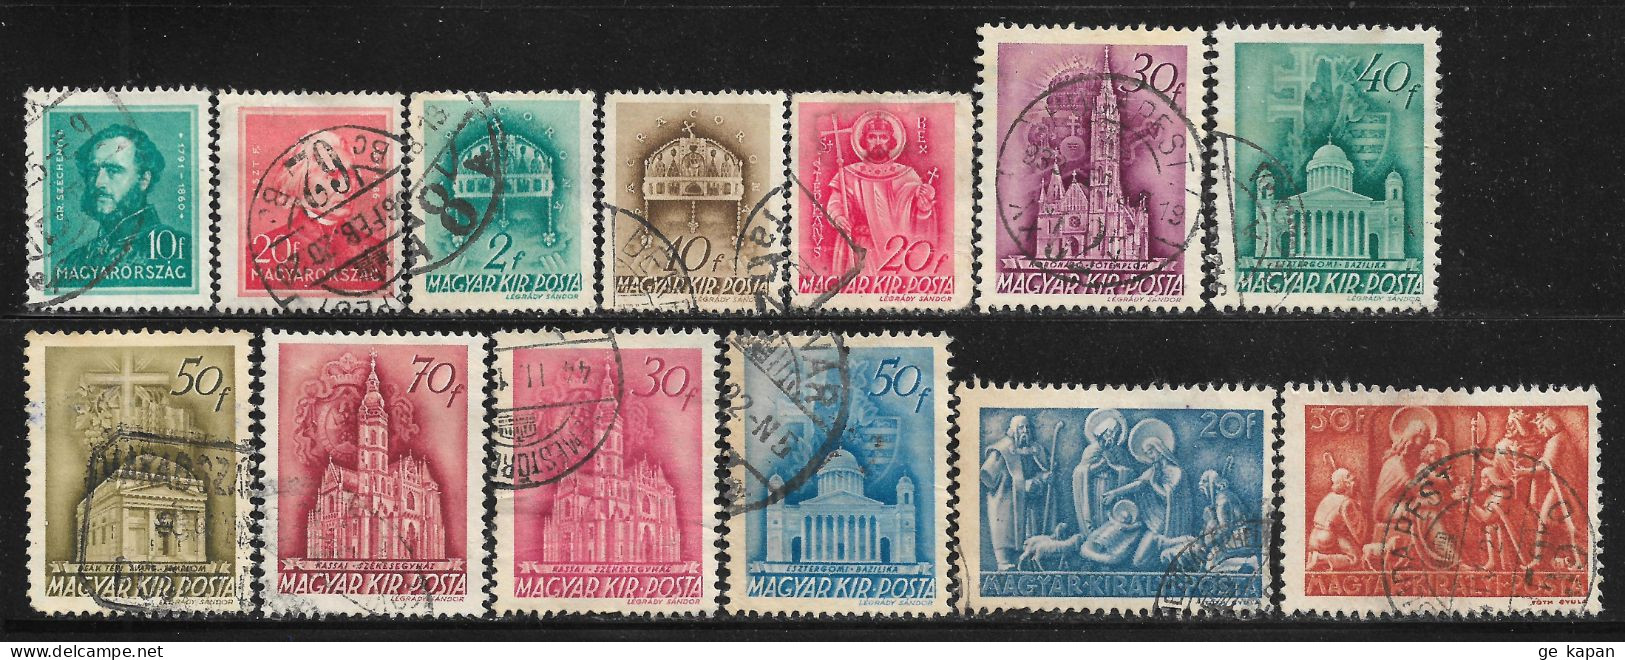 1932-1943 HUNGARY UNGARN MAGYAR LOT OF 13 USED STAMPS - Usati